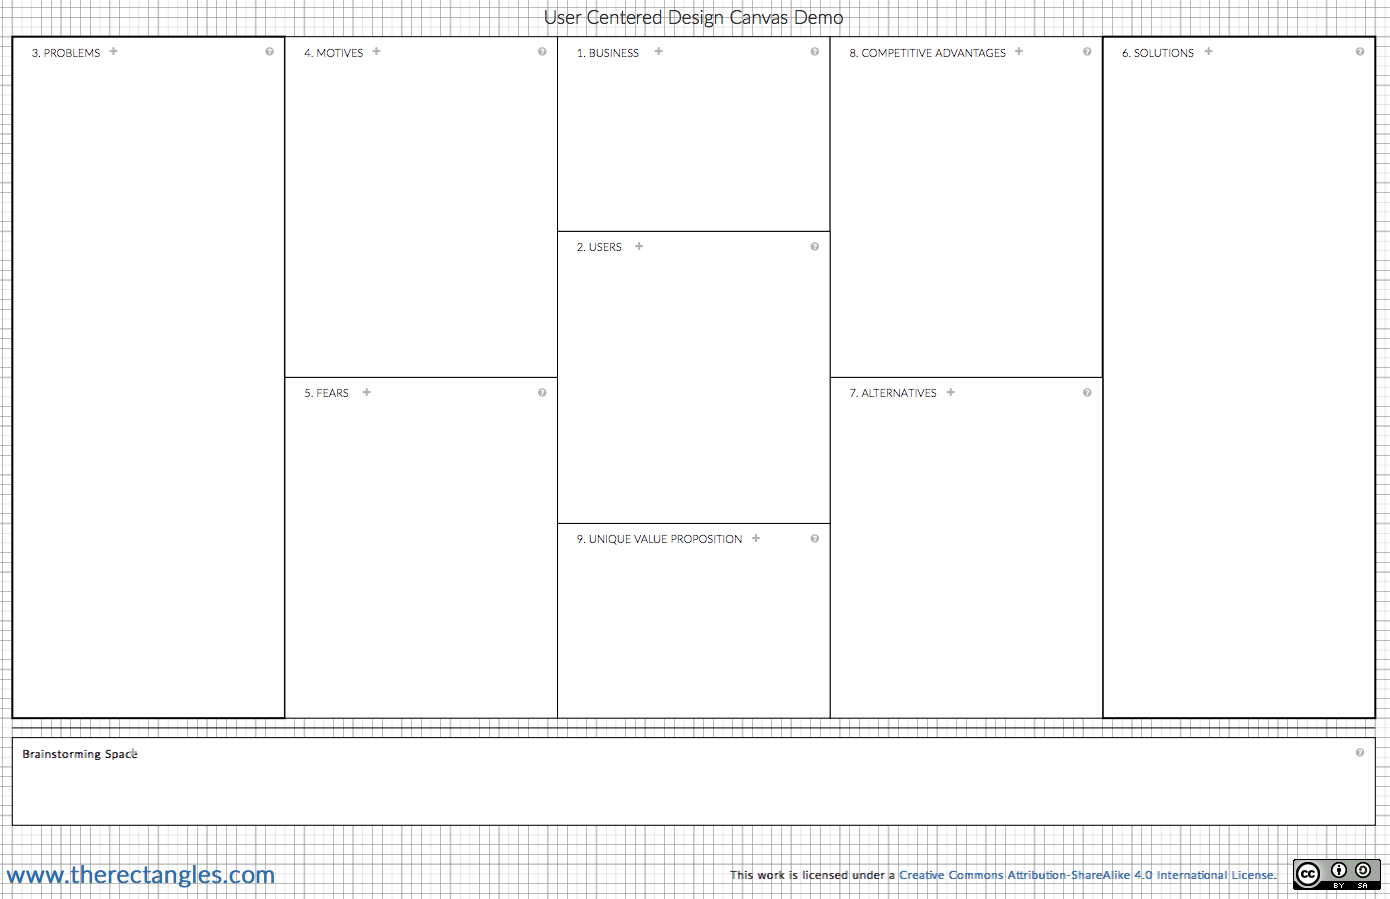 New template: The User Centered Design Canvas - Canvanizer